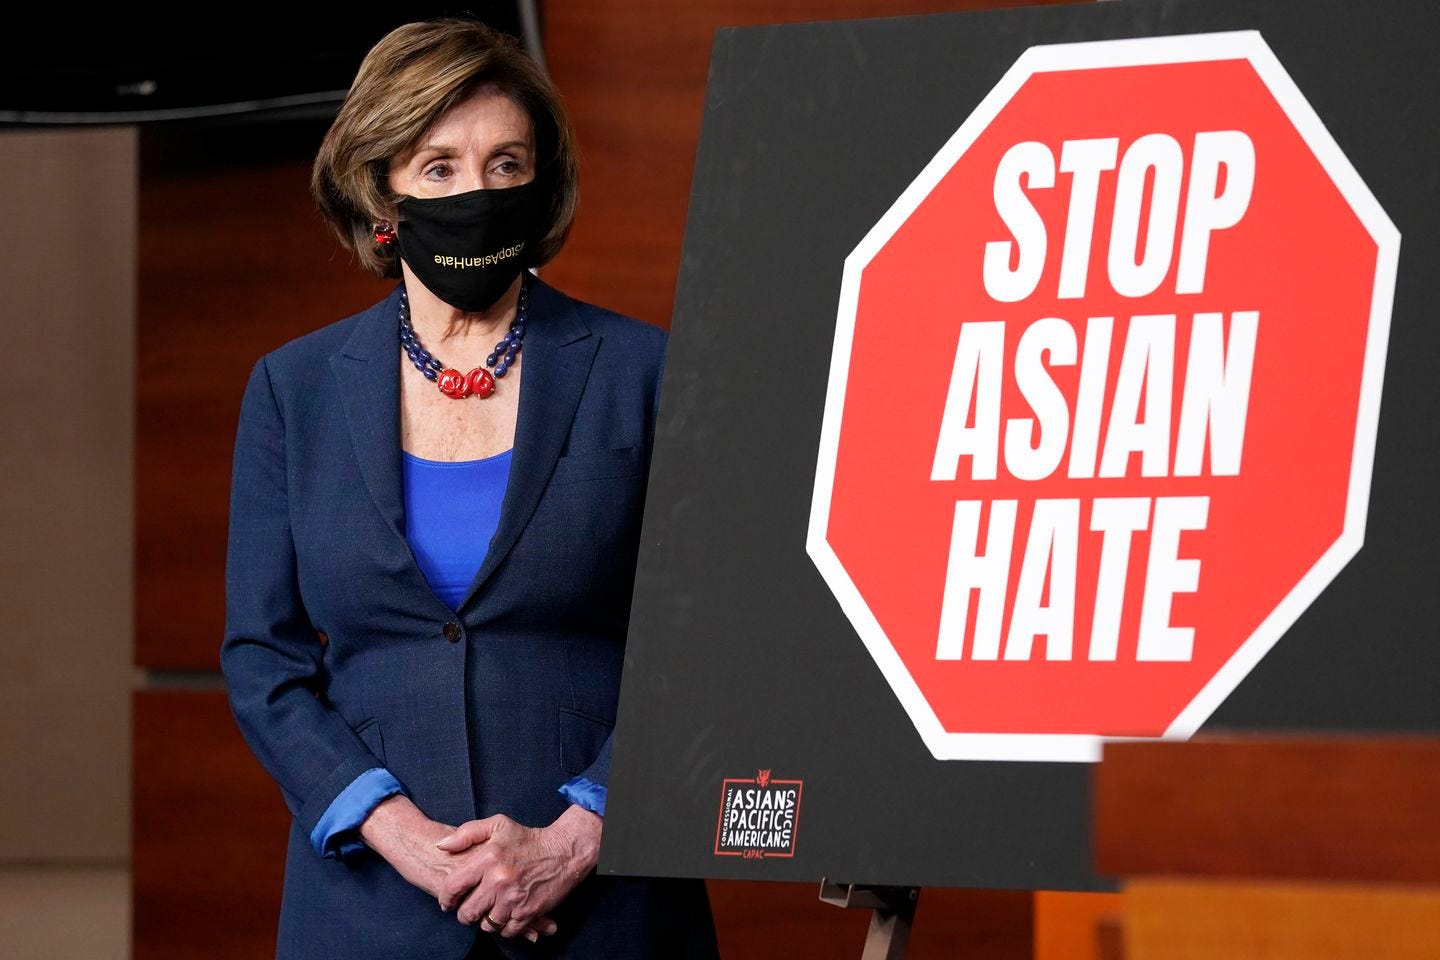 House Speaker Nancy Pelosi of California during a news conference on in Washington on the COVID-19 Hate Crimes Act.